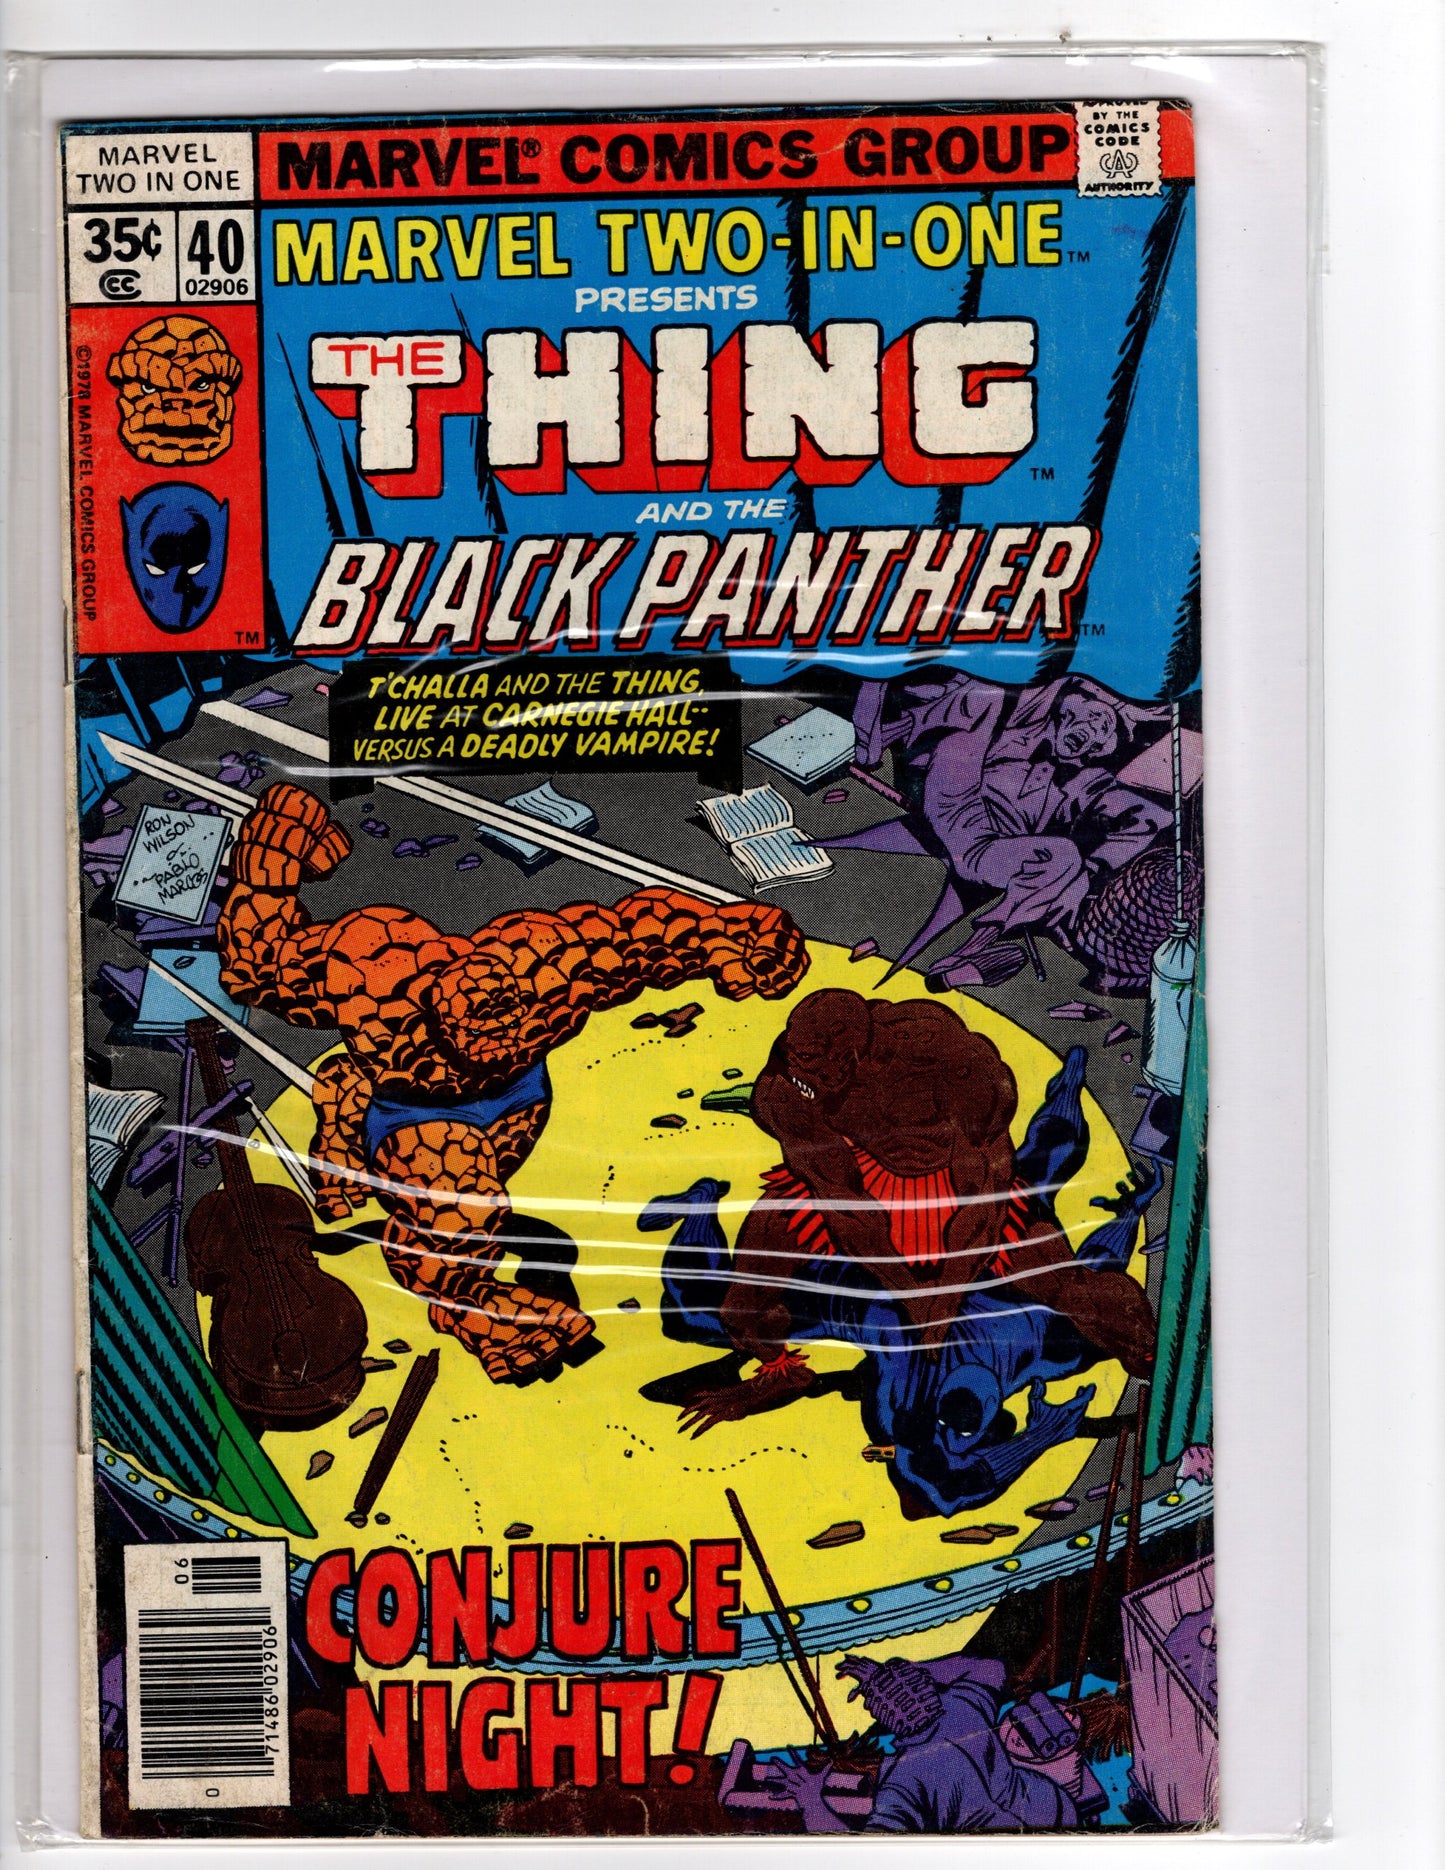 Marvel Two-in-One #40